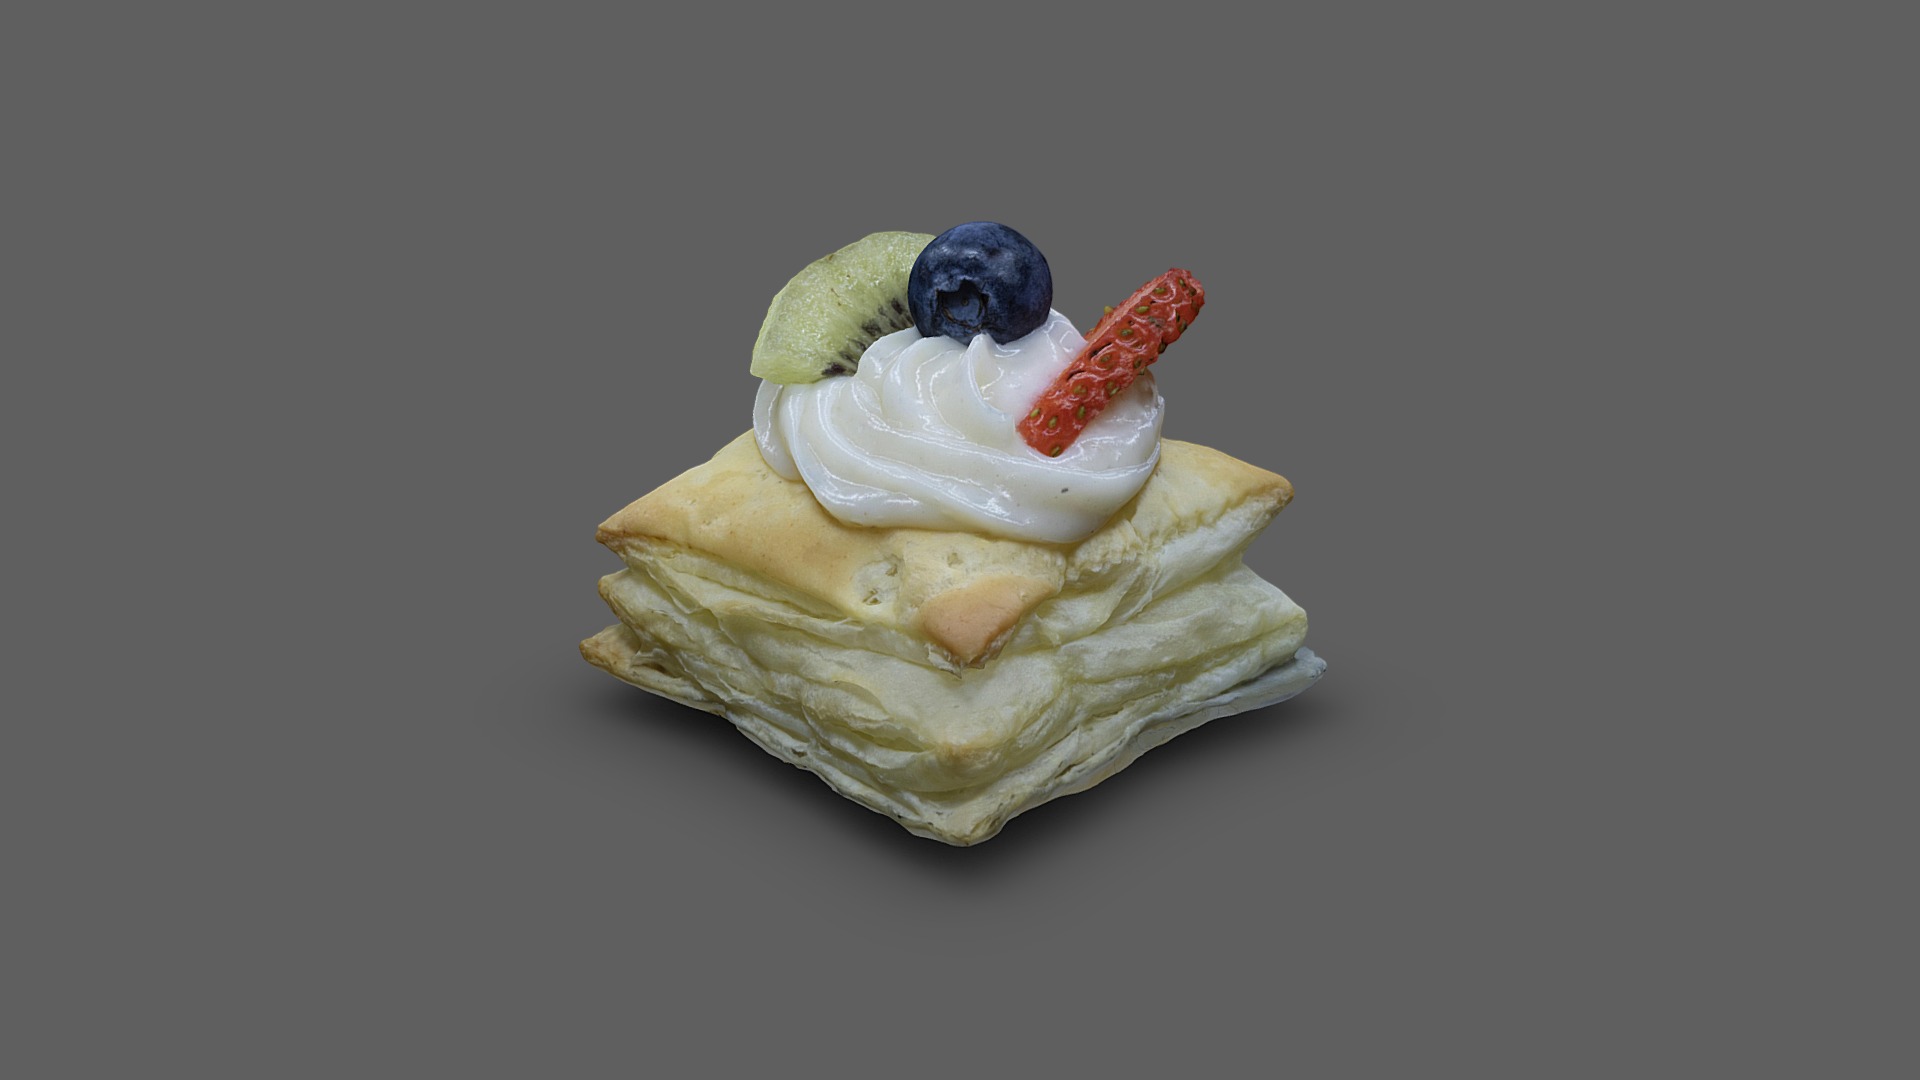 3D model Fruit tart - This is a 3D model of the Fruit tart. The 3D model is about a cupcake with a blueberry on top.